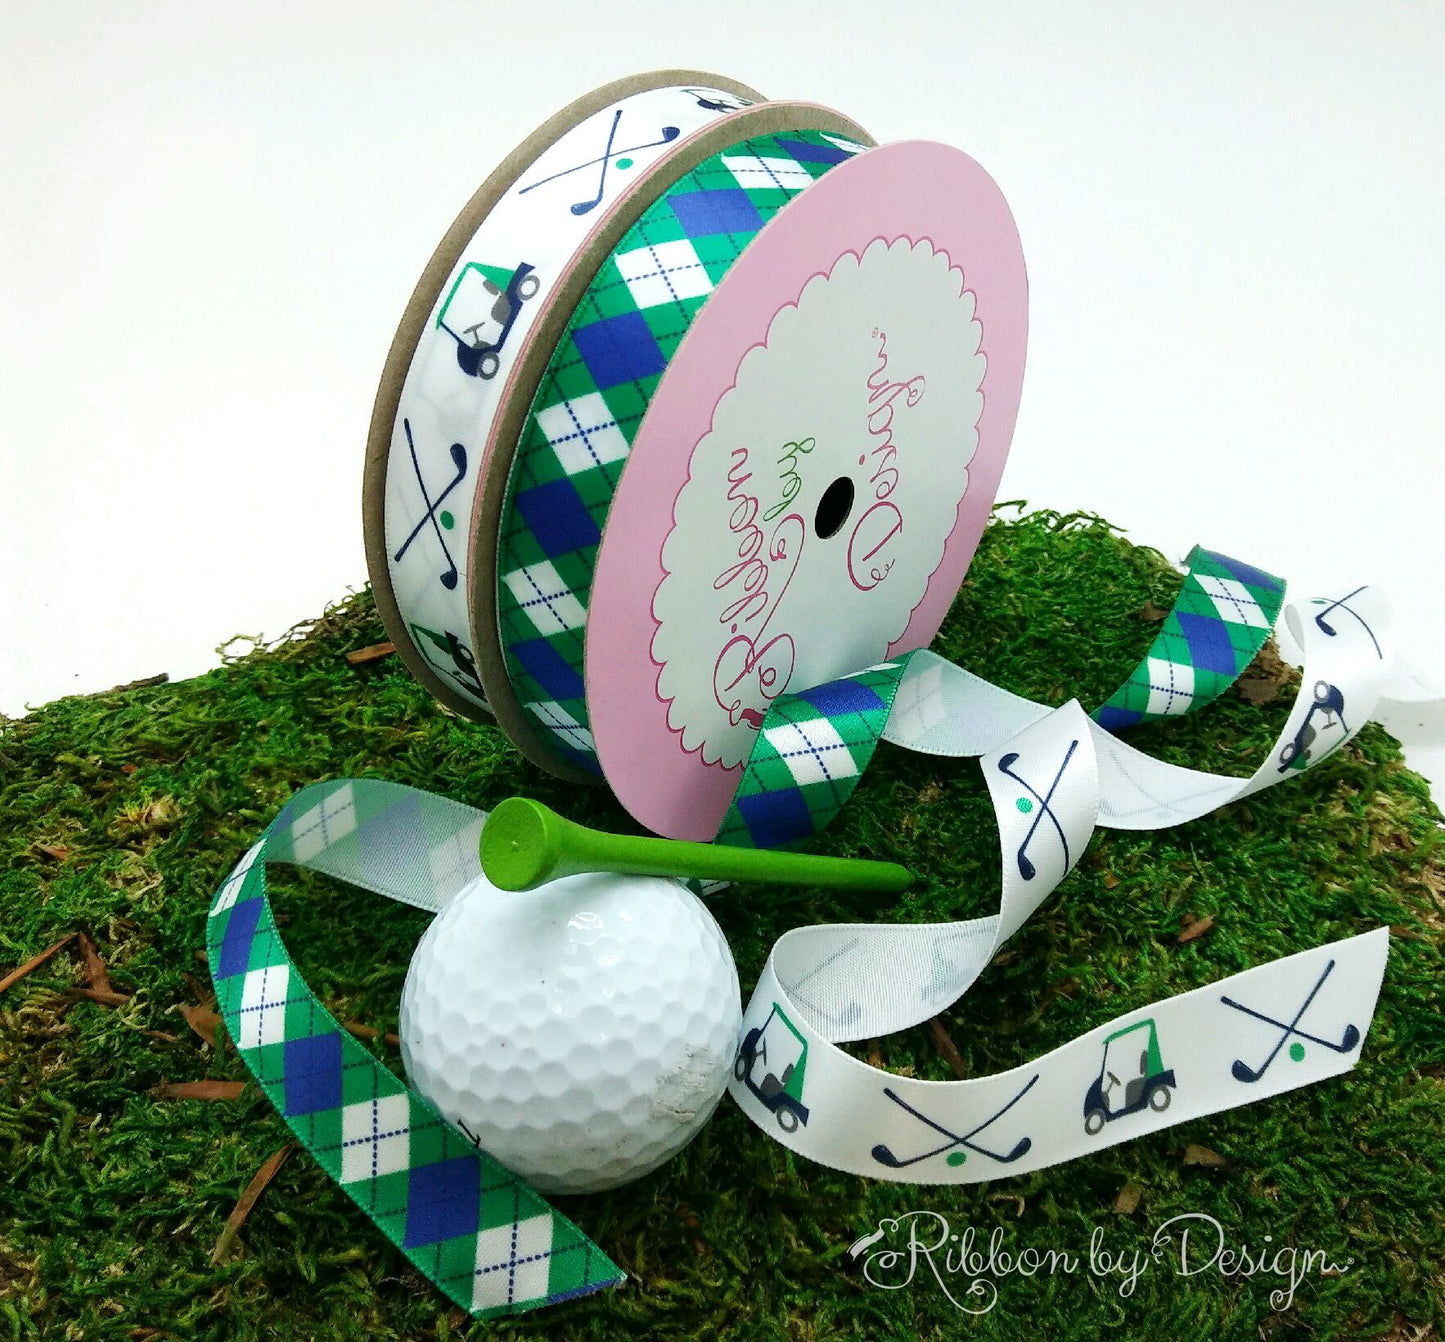 Golf theme ribbon with carts and clubs in Green and Blue printed on 5/8" white single face satin